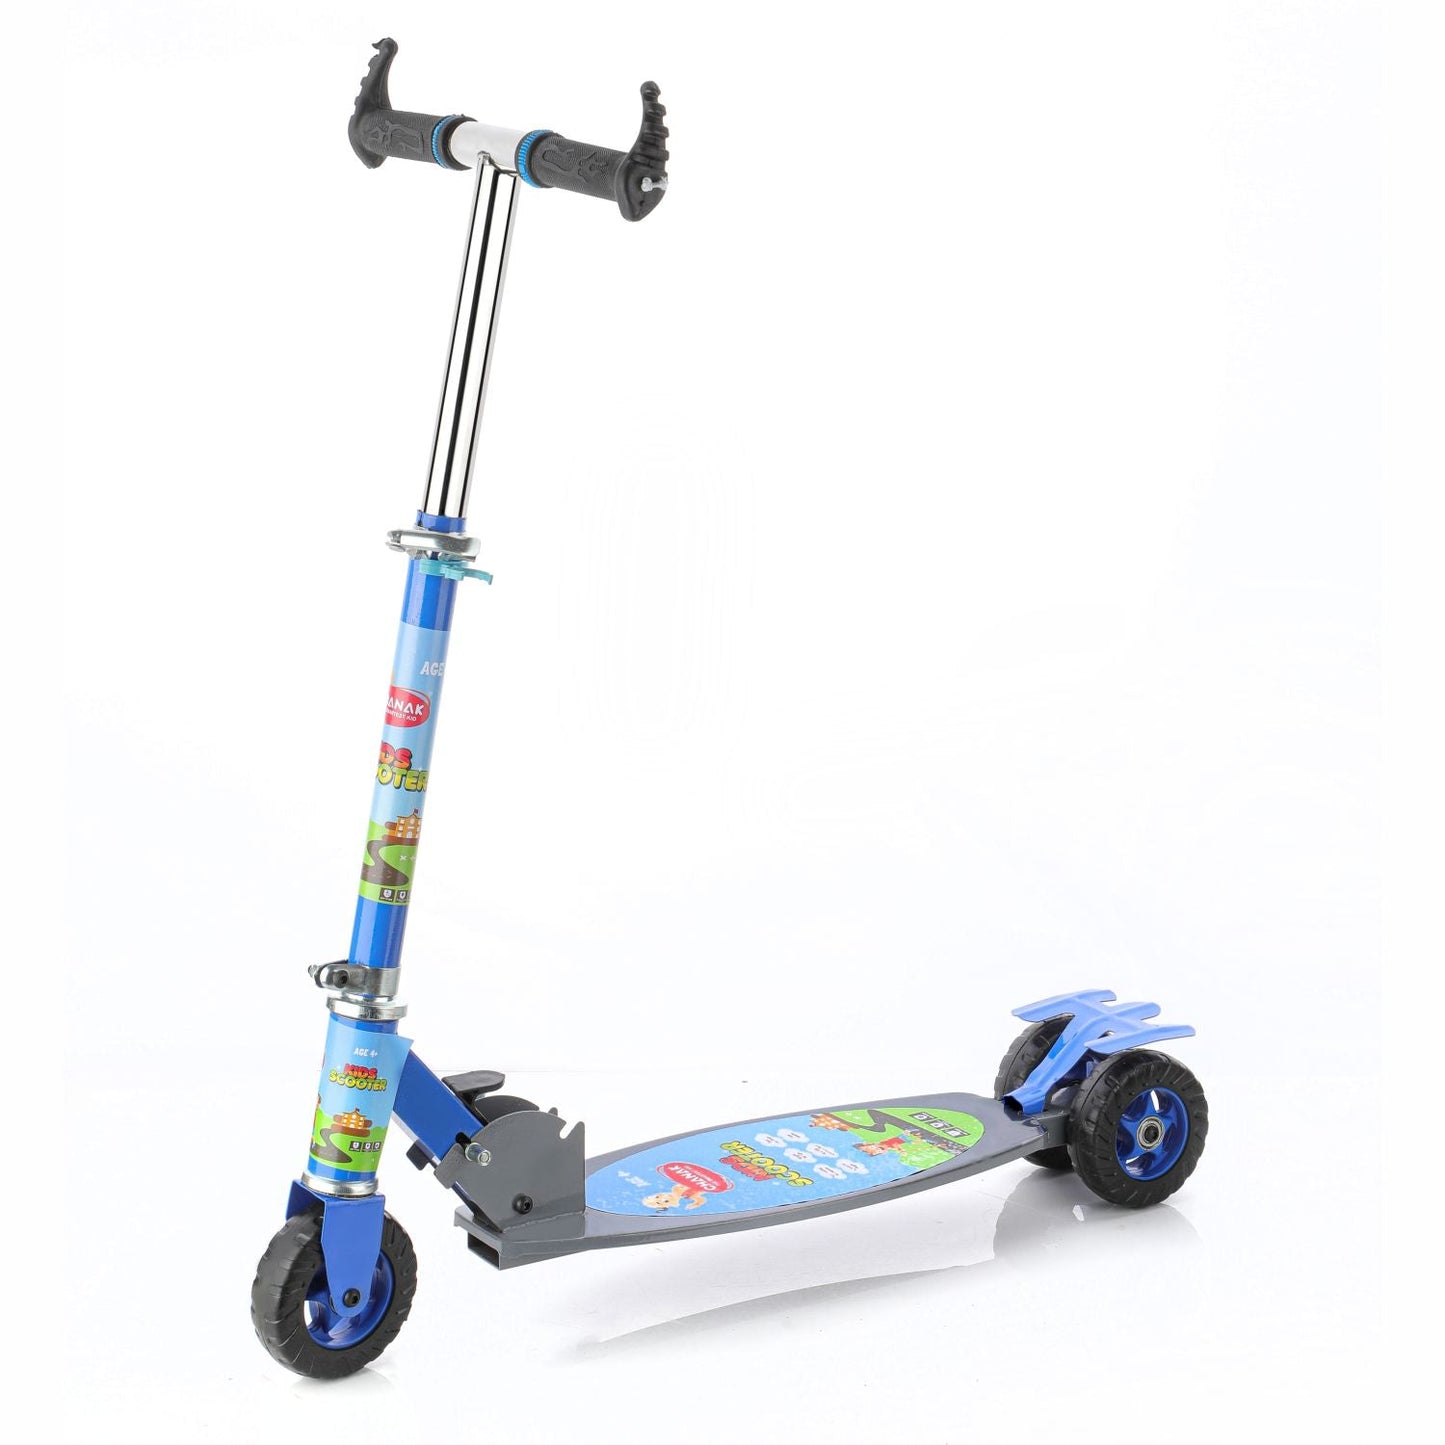 Chanak Kick Scooter for kids Glider Toddler Scooter